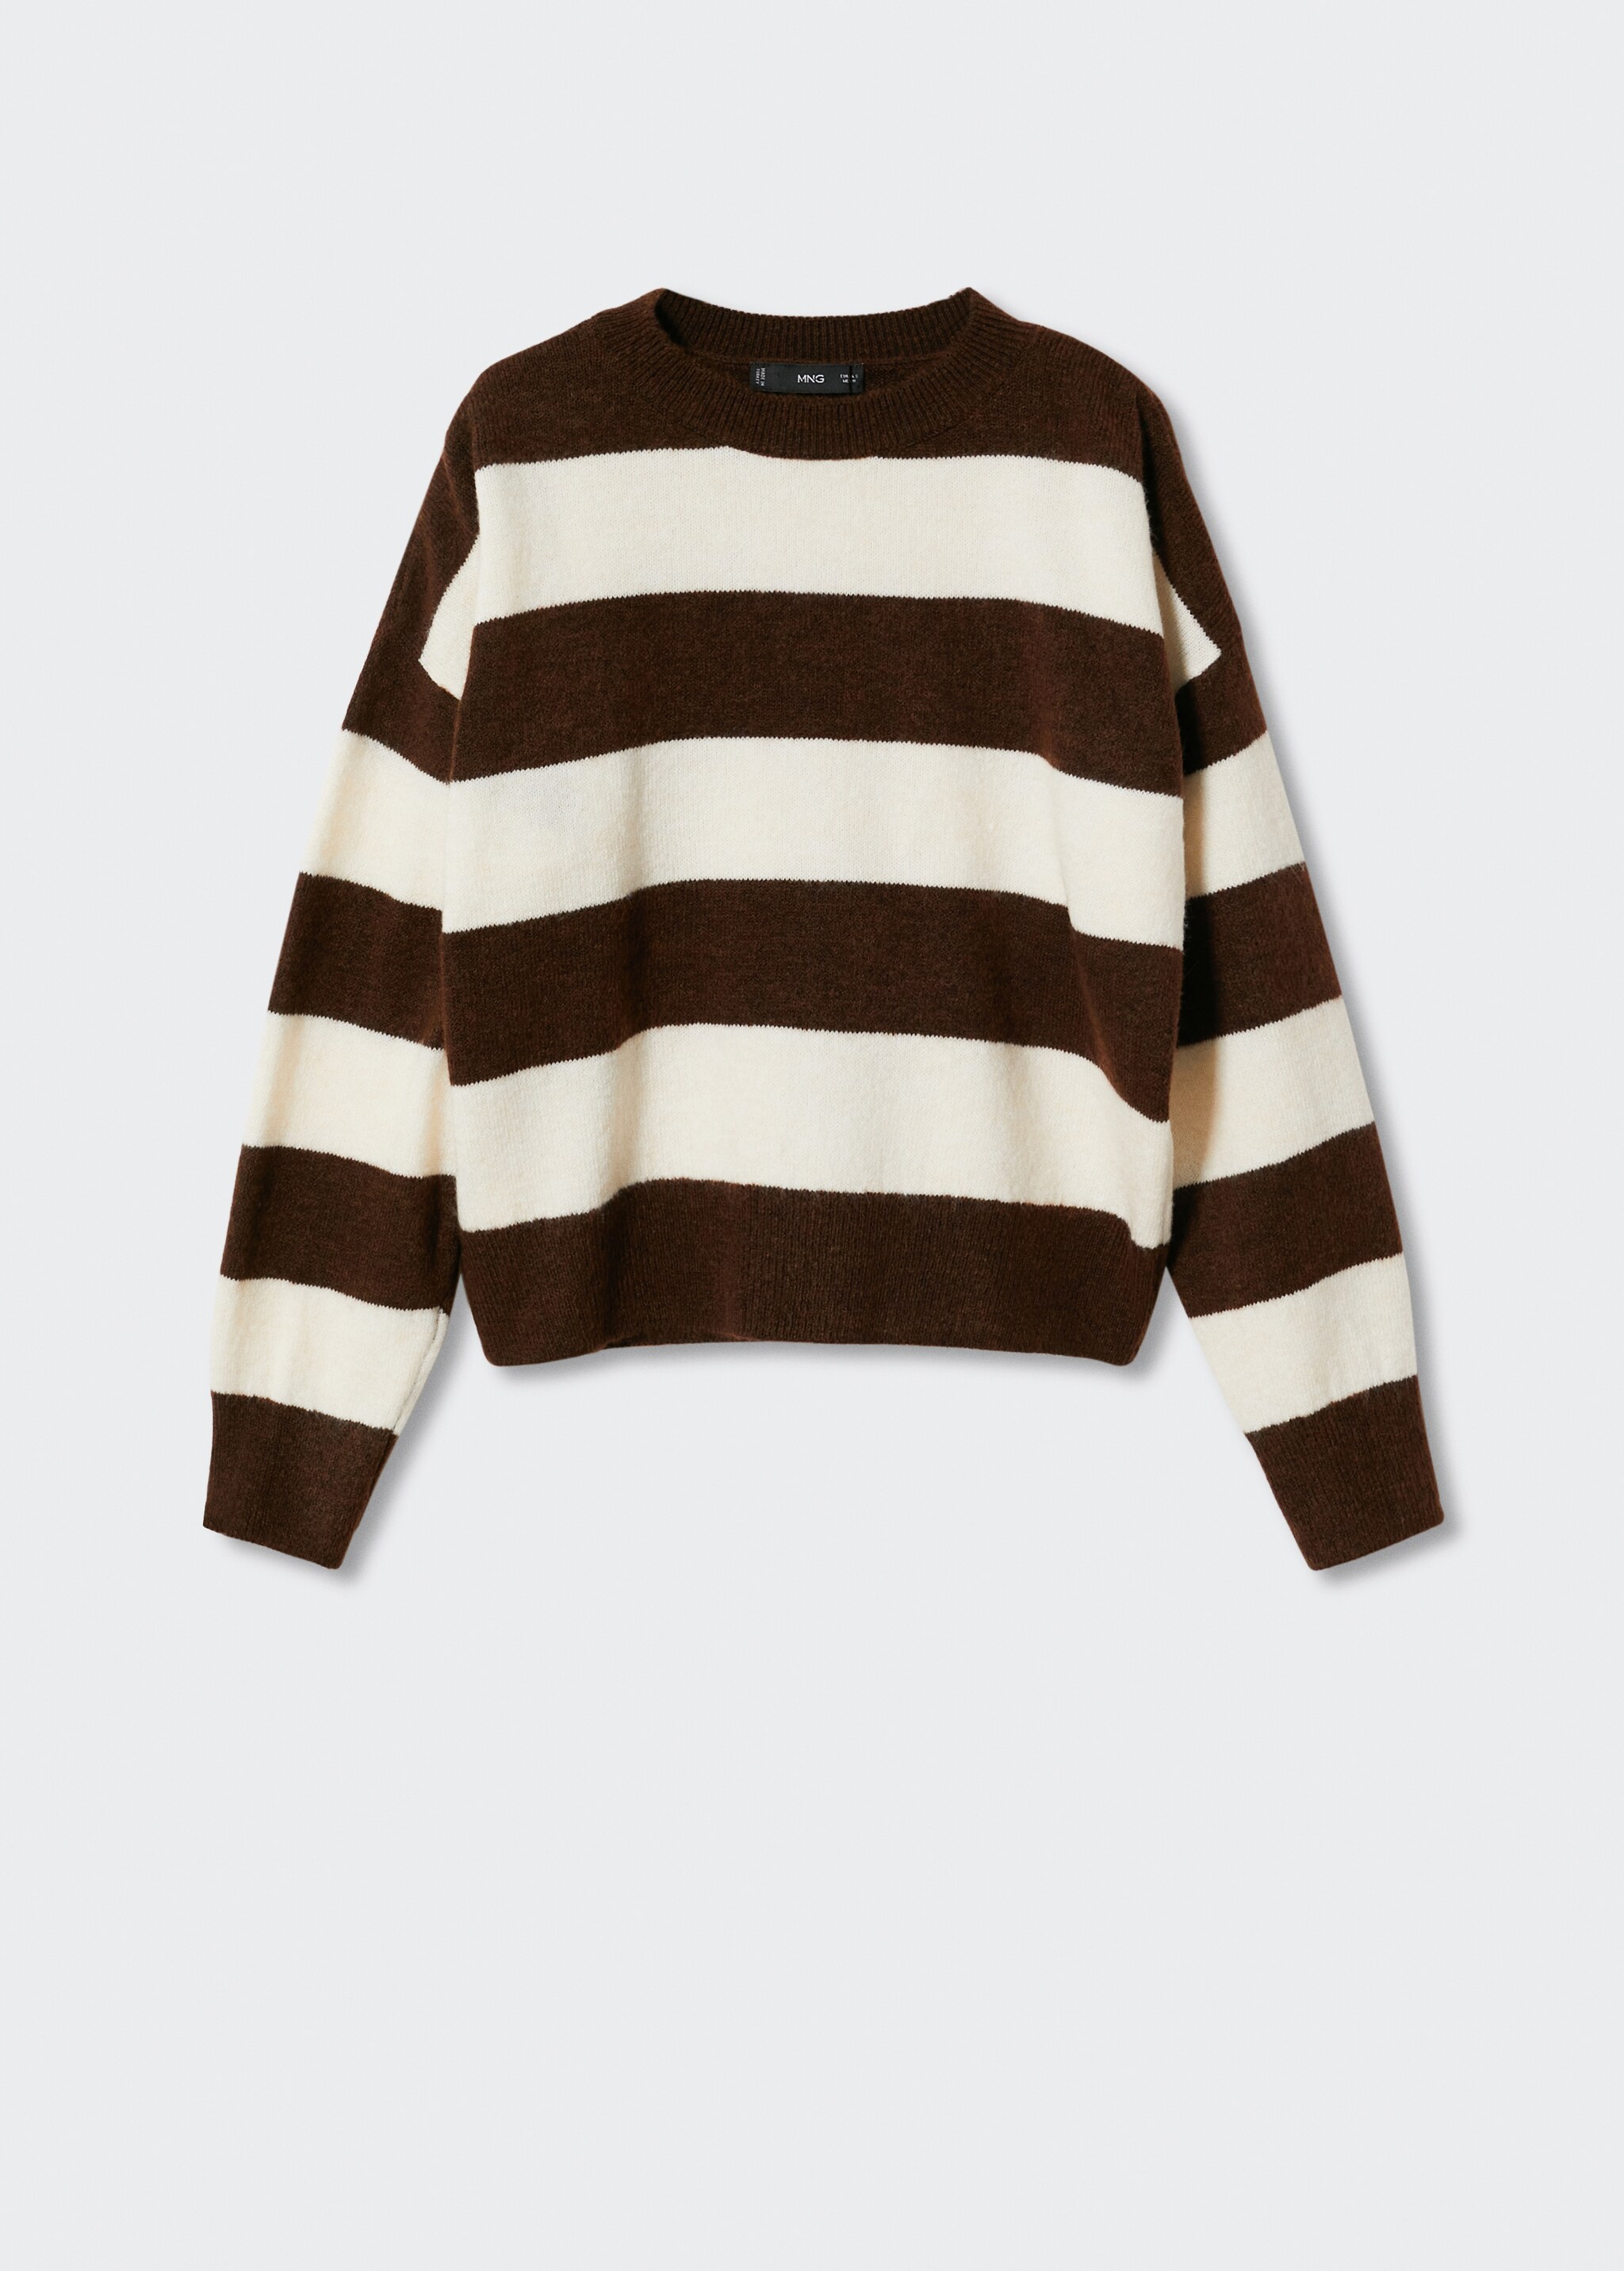 Round-neck striped sweater - Article without model